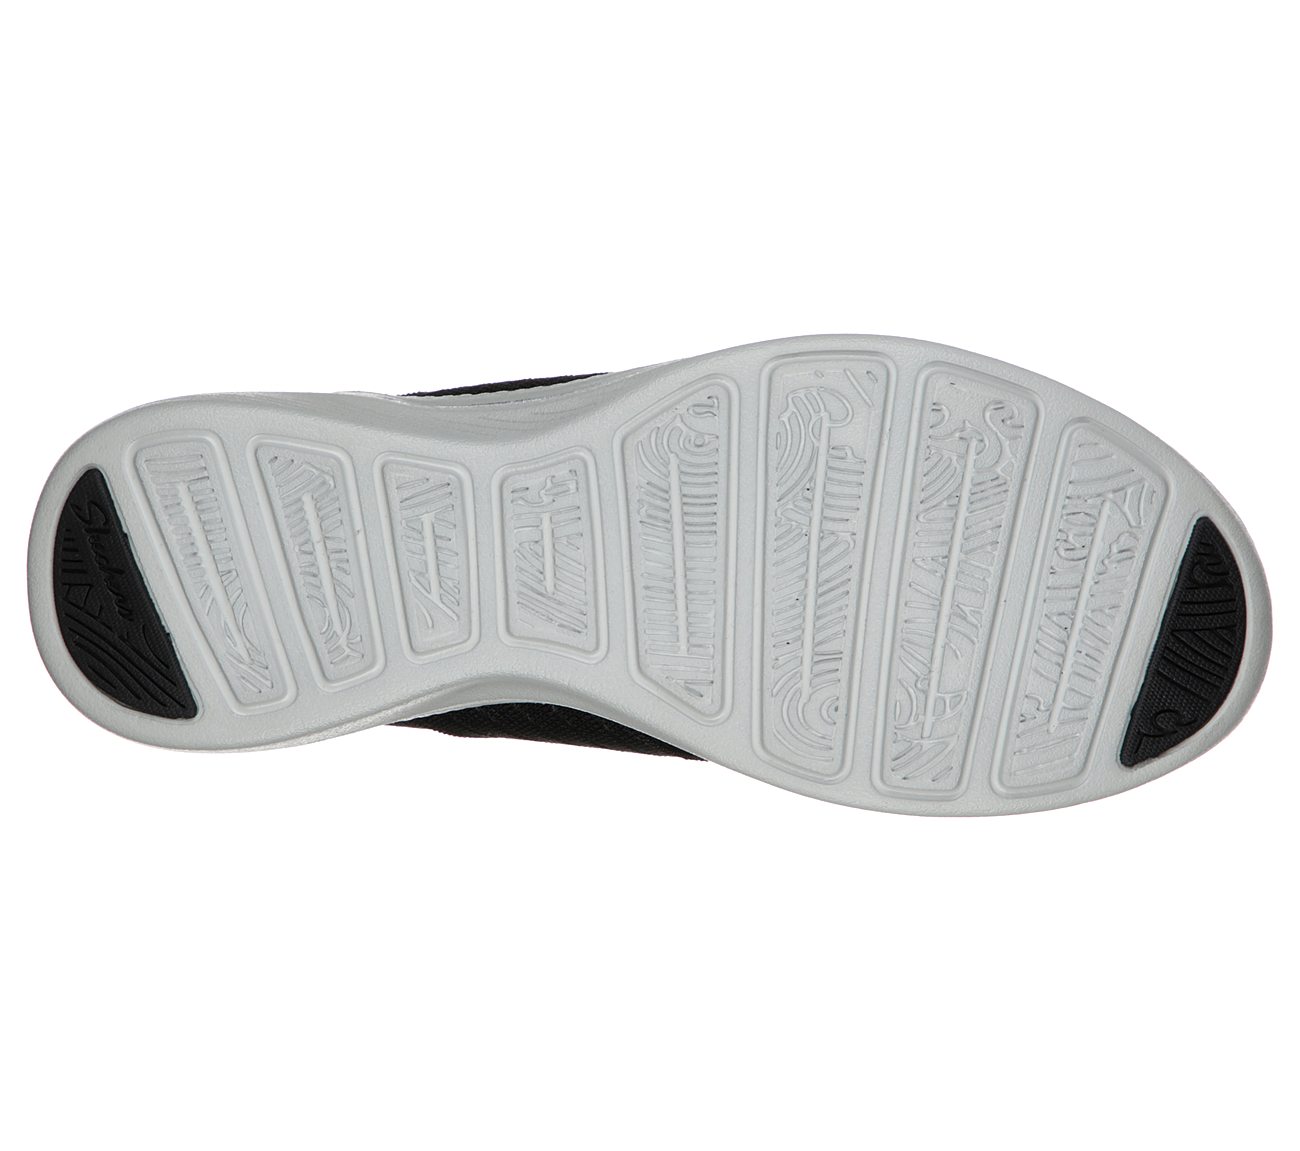 CITY PRO - EASY MOVING, BBBBLACK Footwear Bottom View